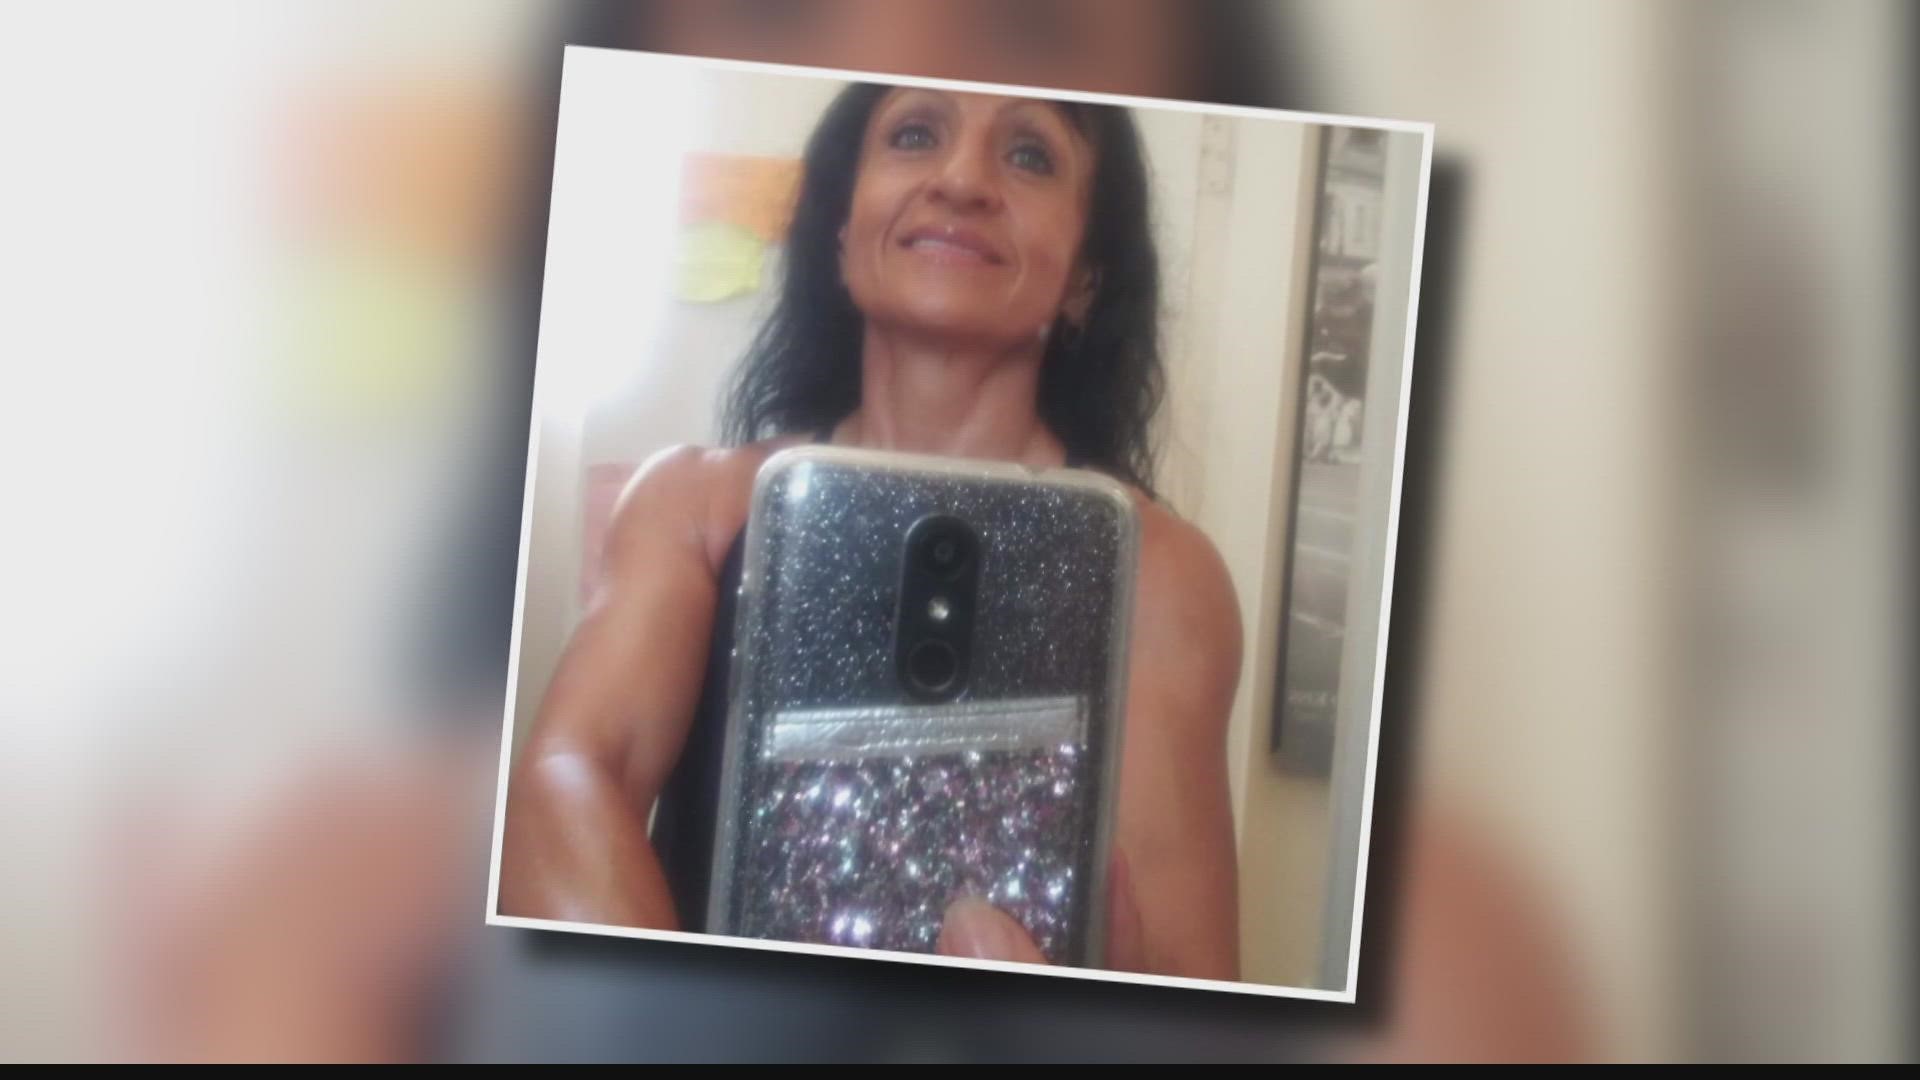 Pamela Rae Martinez, 60, was shot and killed earlier this month as she was making food deliveries around the Valley.